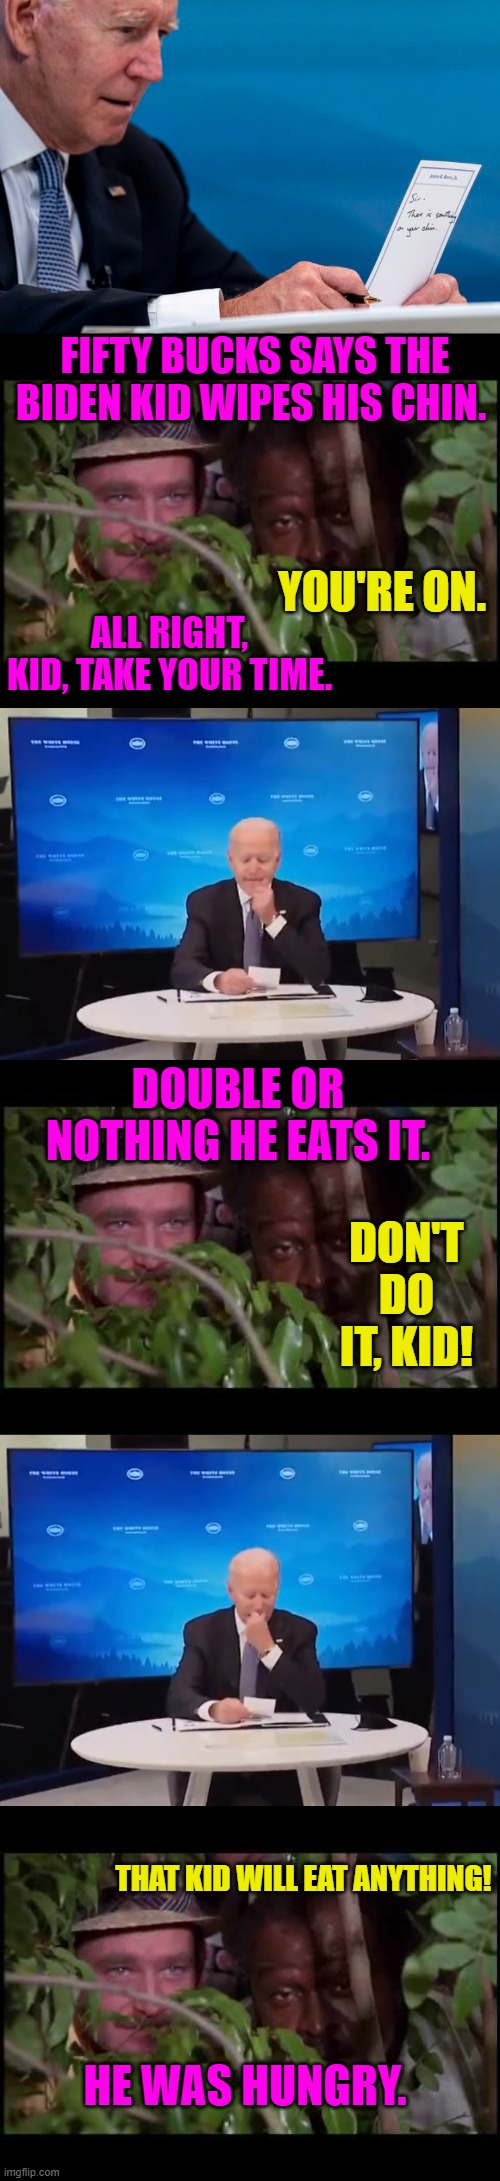 Meanwhile, we'll get nothing and like it! |  FIFTY BUCKS SAYS THE BIDEN KID WIPES HIS CHIN. YOU'RE ON. ALL RIGHT, KID, TAKE YOUR TIME. DOUBLE OR NOTHING HE EATS IT. DON'T DO IT, KID! THAT KID WILL EAT ANYTHING! HE WAS HUNGRY. | image tagged in biden,booger eating moron,caddyshack,spaulding,dementia,elder abuse | made w/ Imgflip meme maker